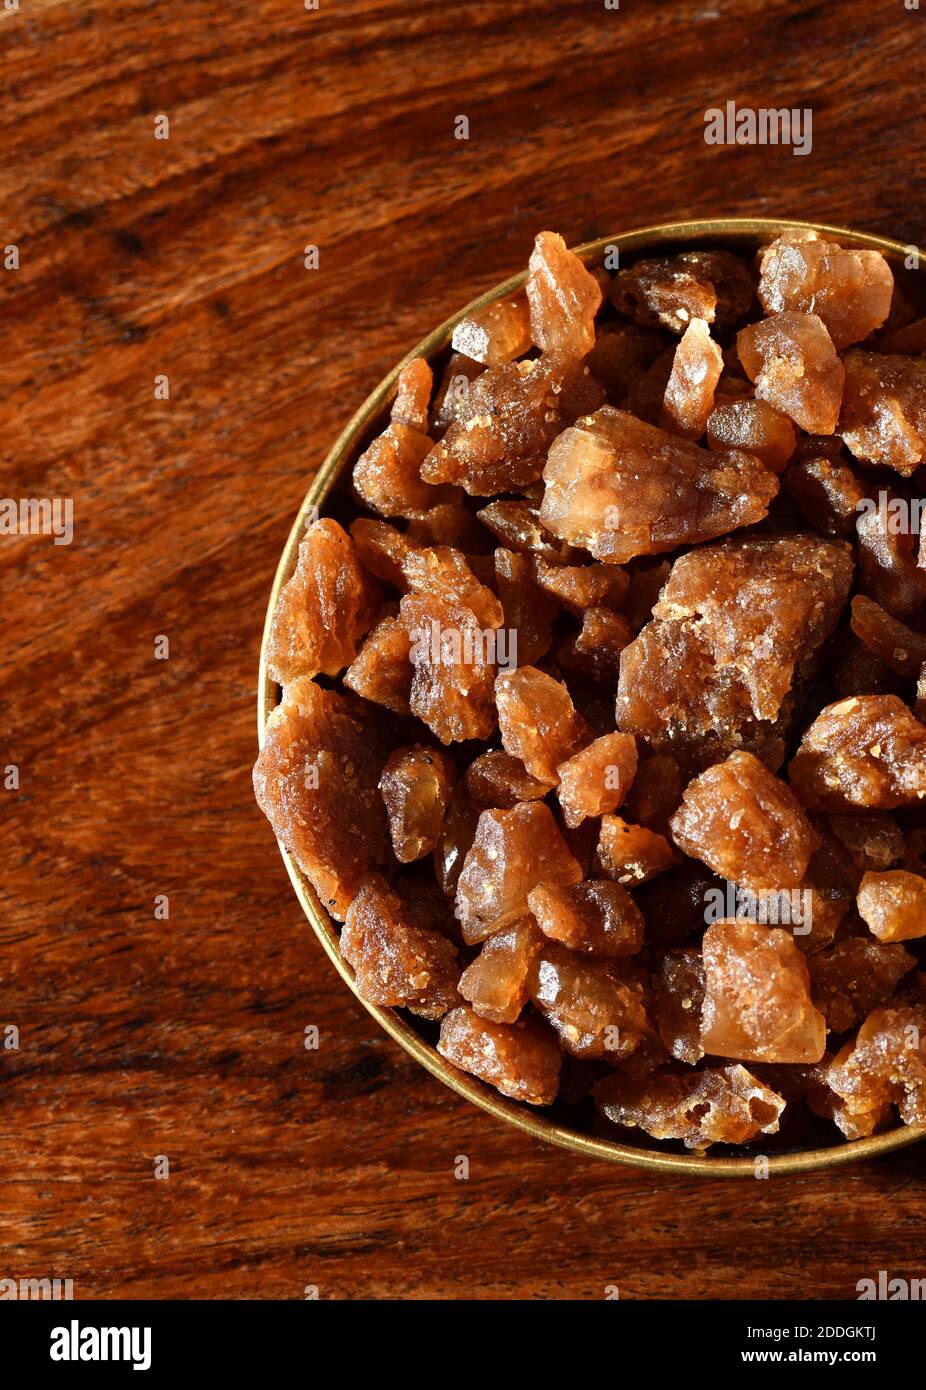 Palm Jaggery or Palm Sugar Candy also known as Panam Kalkandu is an organic sweetener that is made from the flowers of the coconut palm trees. Stock Photo